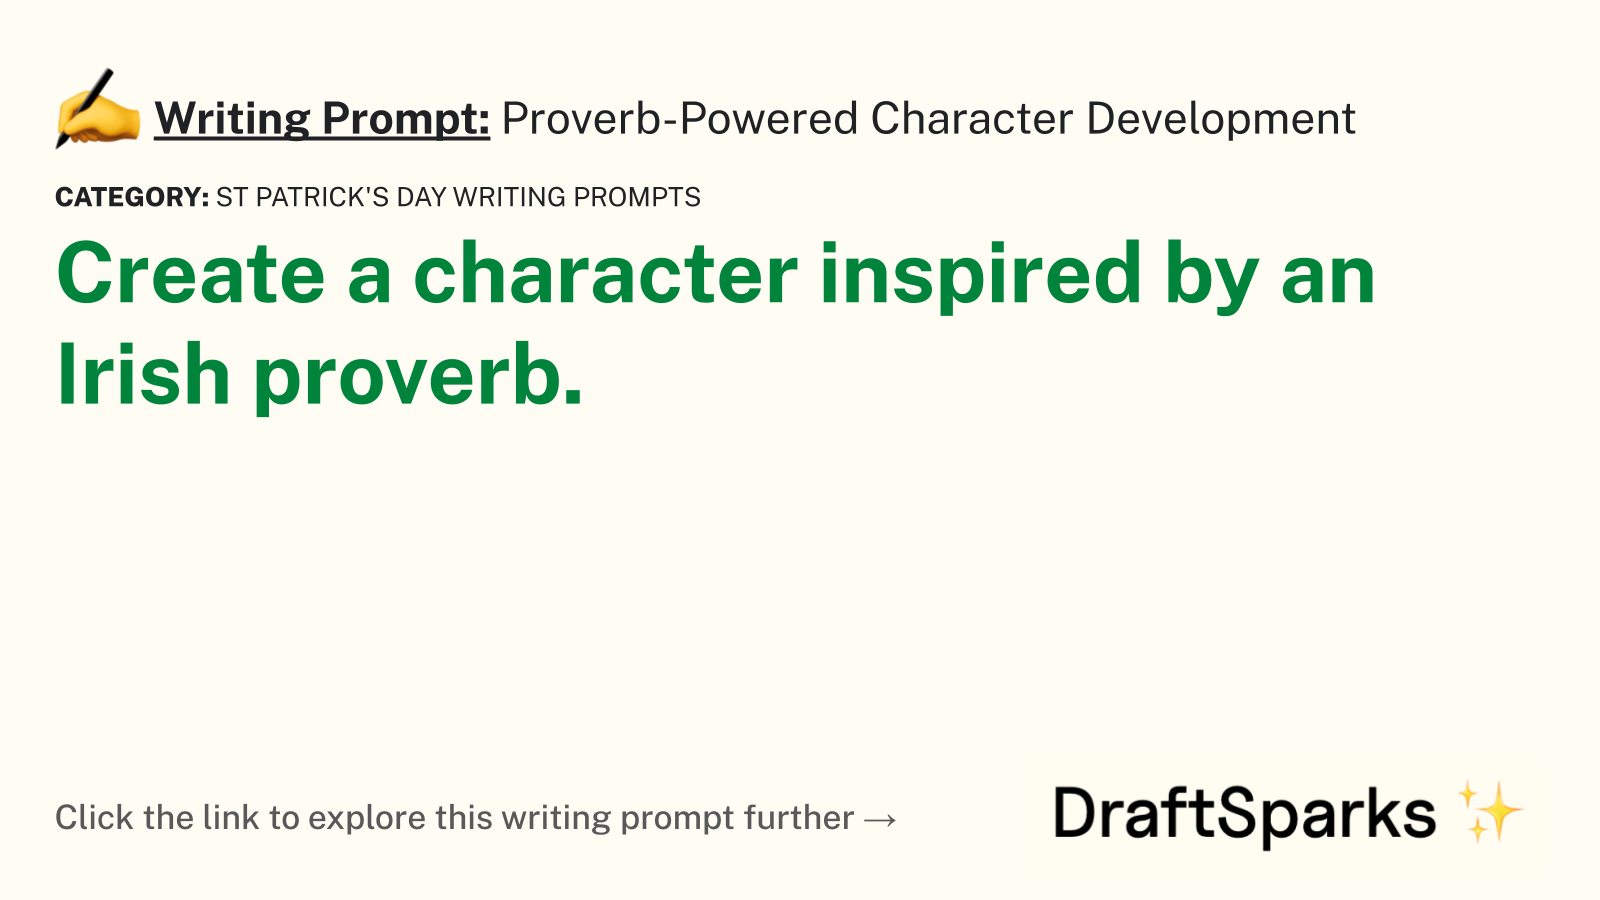 Proverb-Powered Character Development